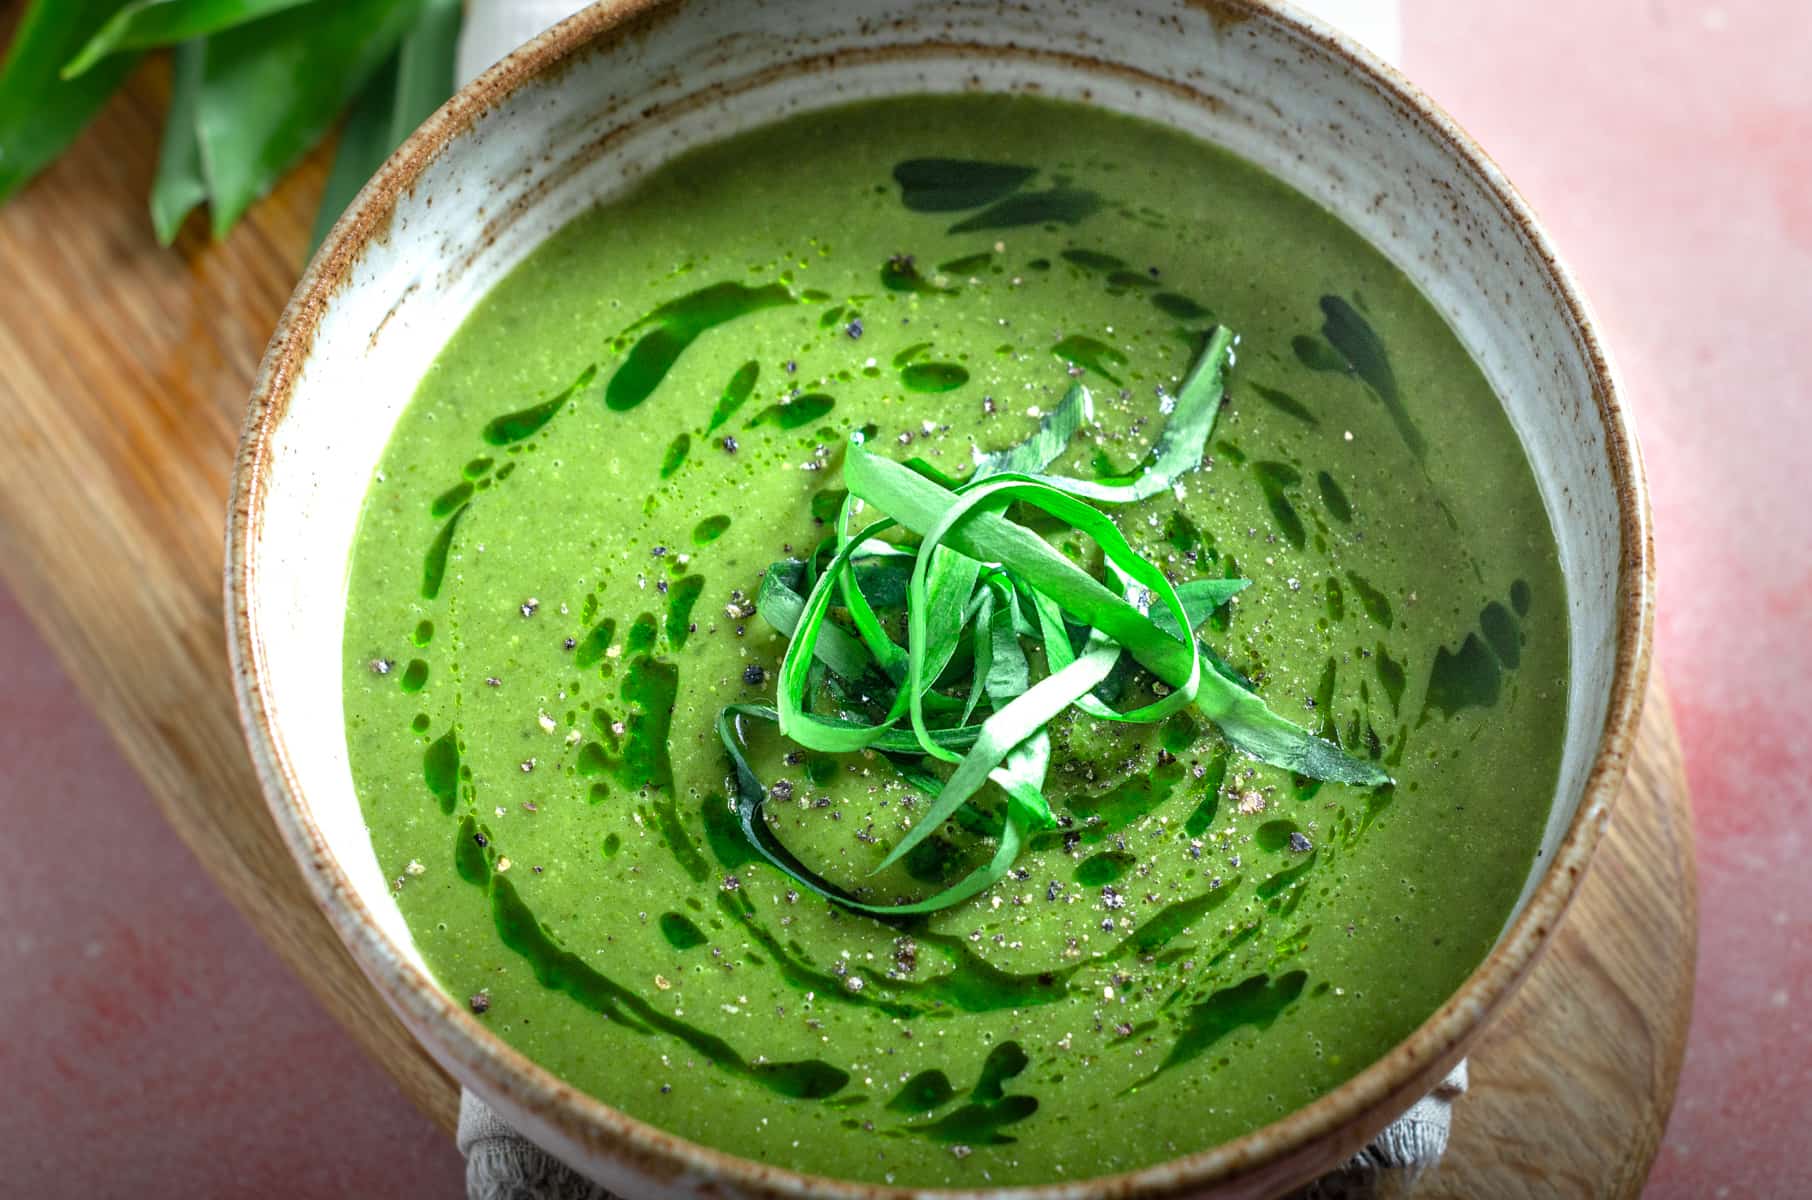 Wild garlic soup drizzled with wild garlic oil and topped with shredded wild garlic leaves.